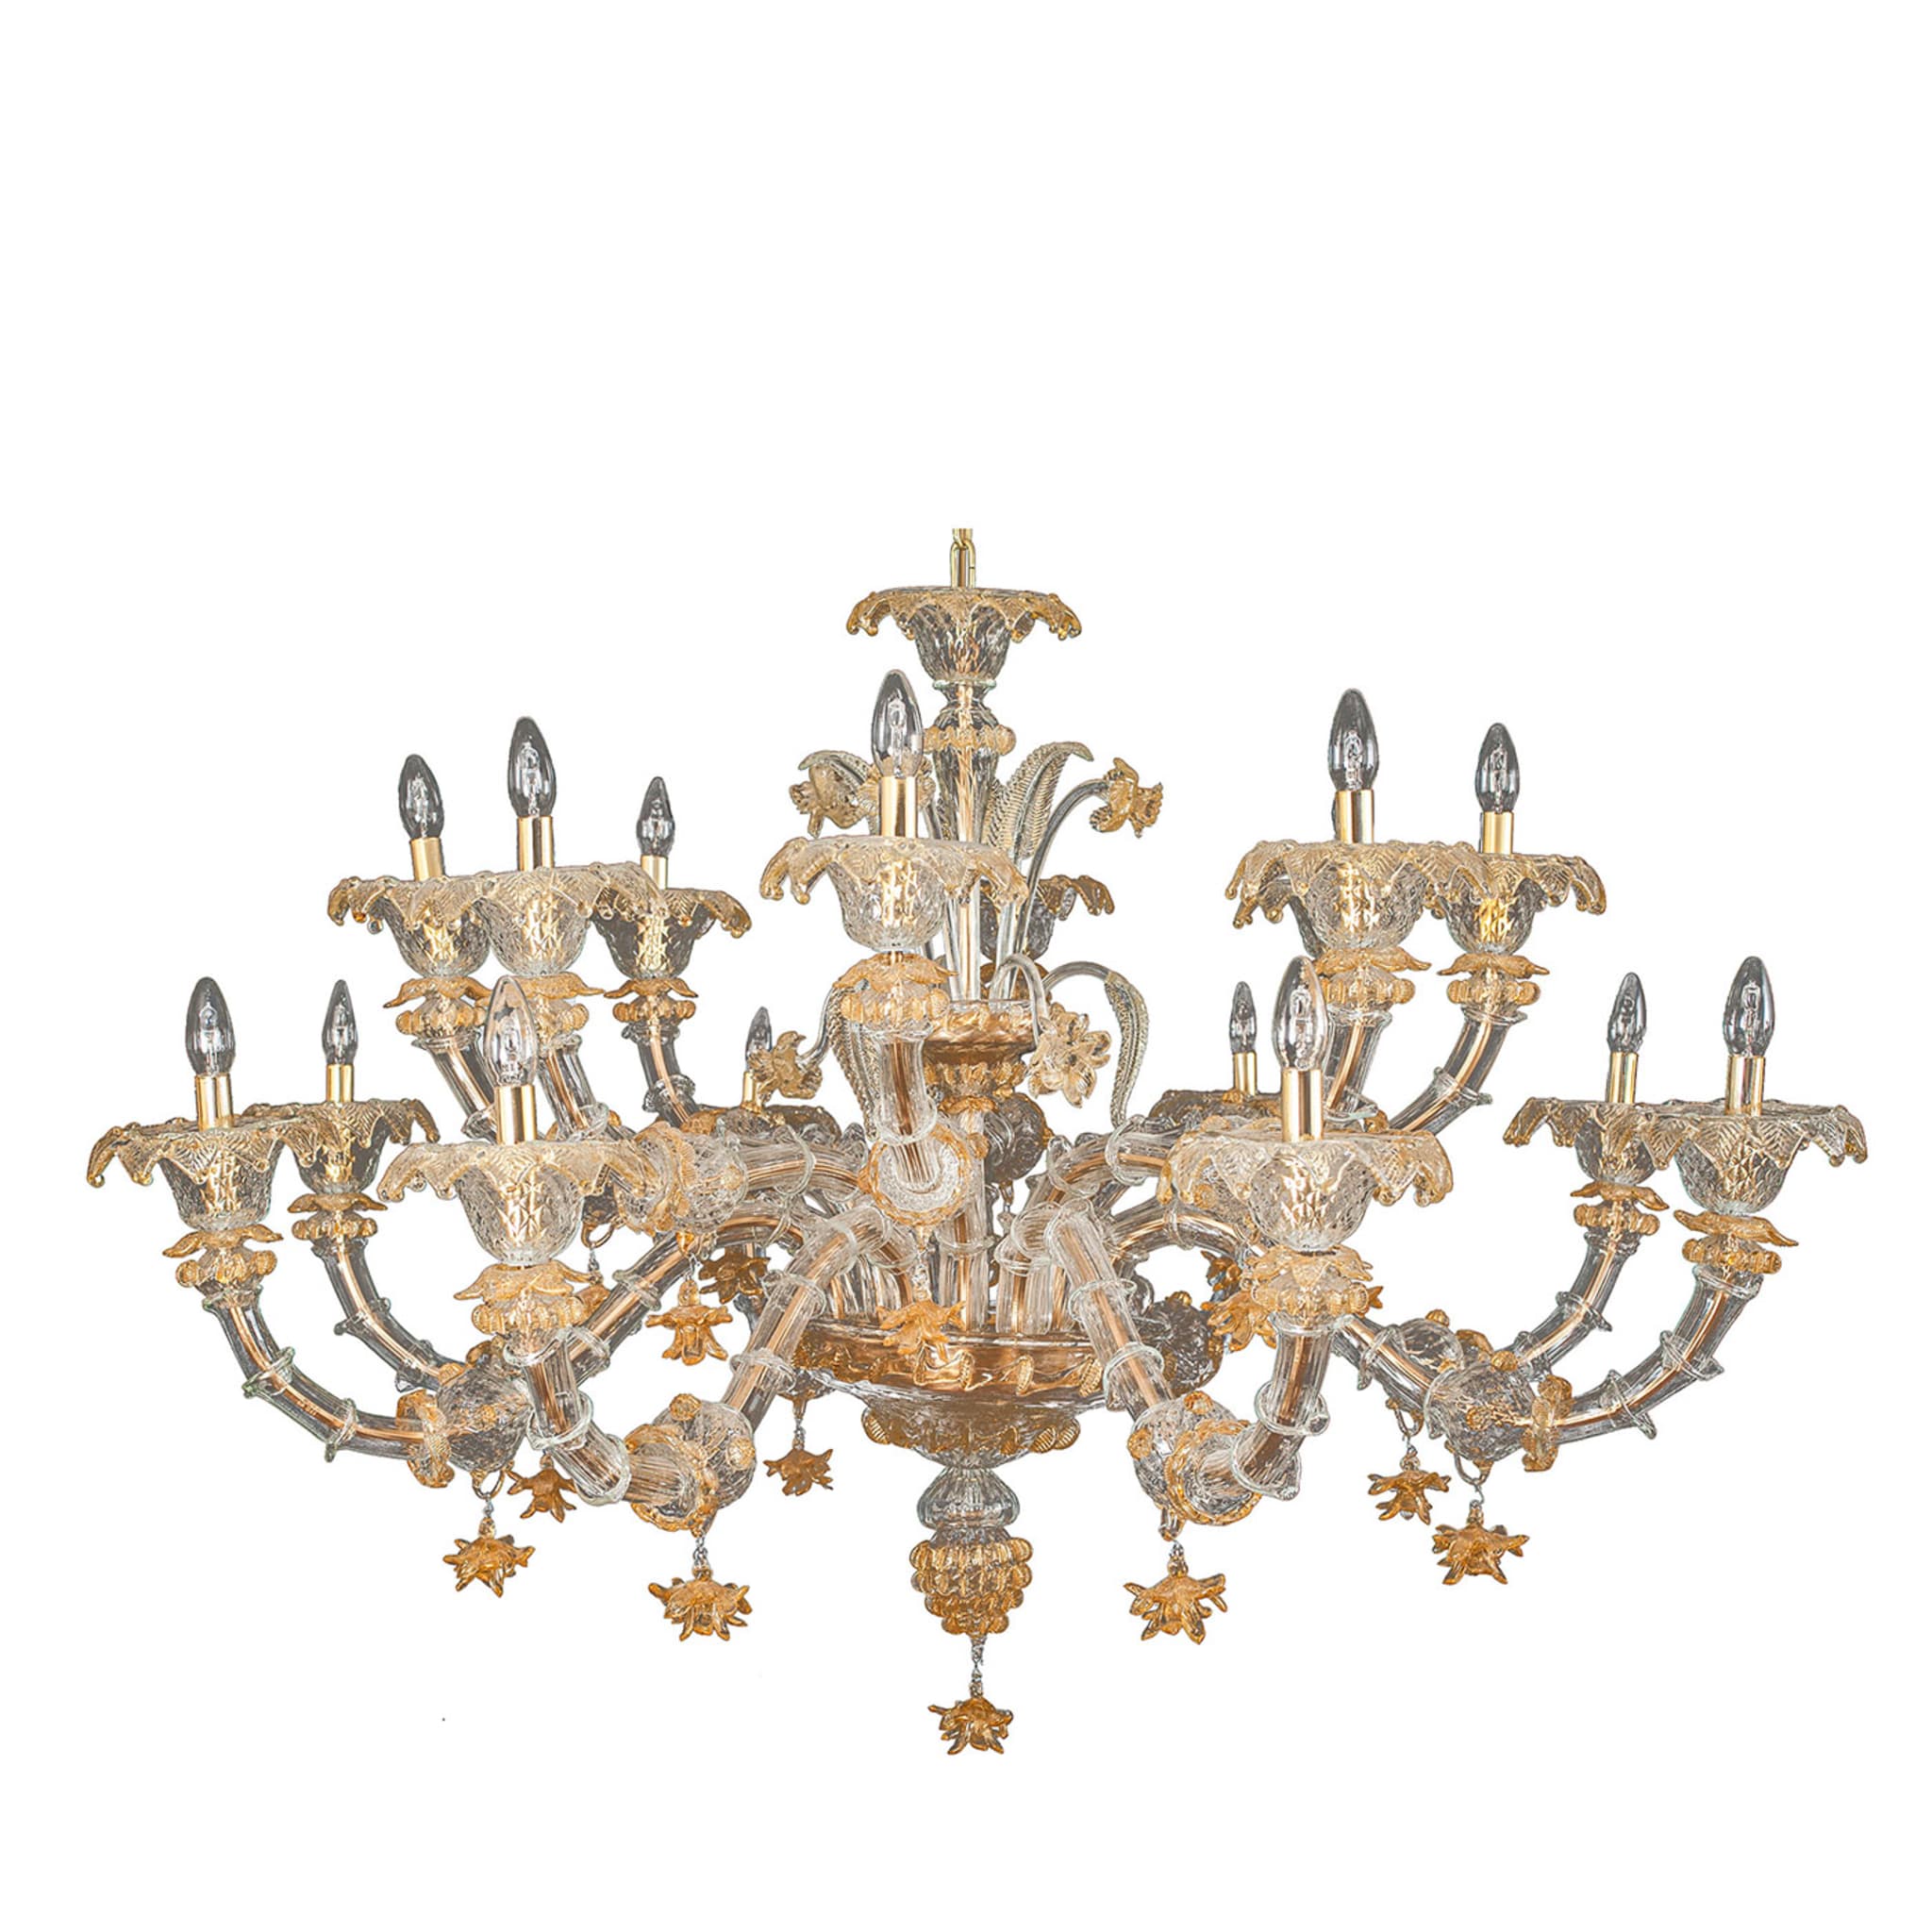 Rezzonico-style Gold and Crystal Chandelier #1 - Main view